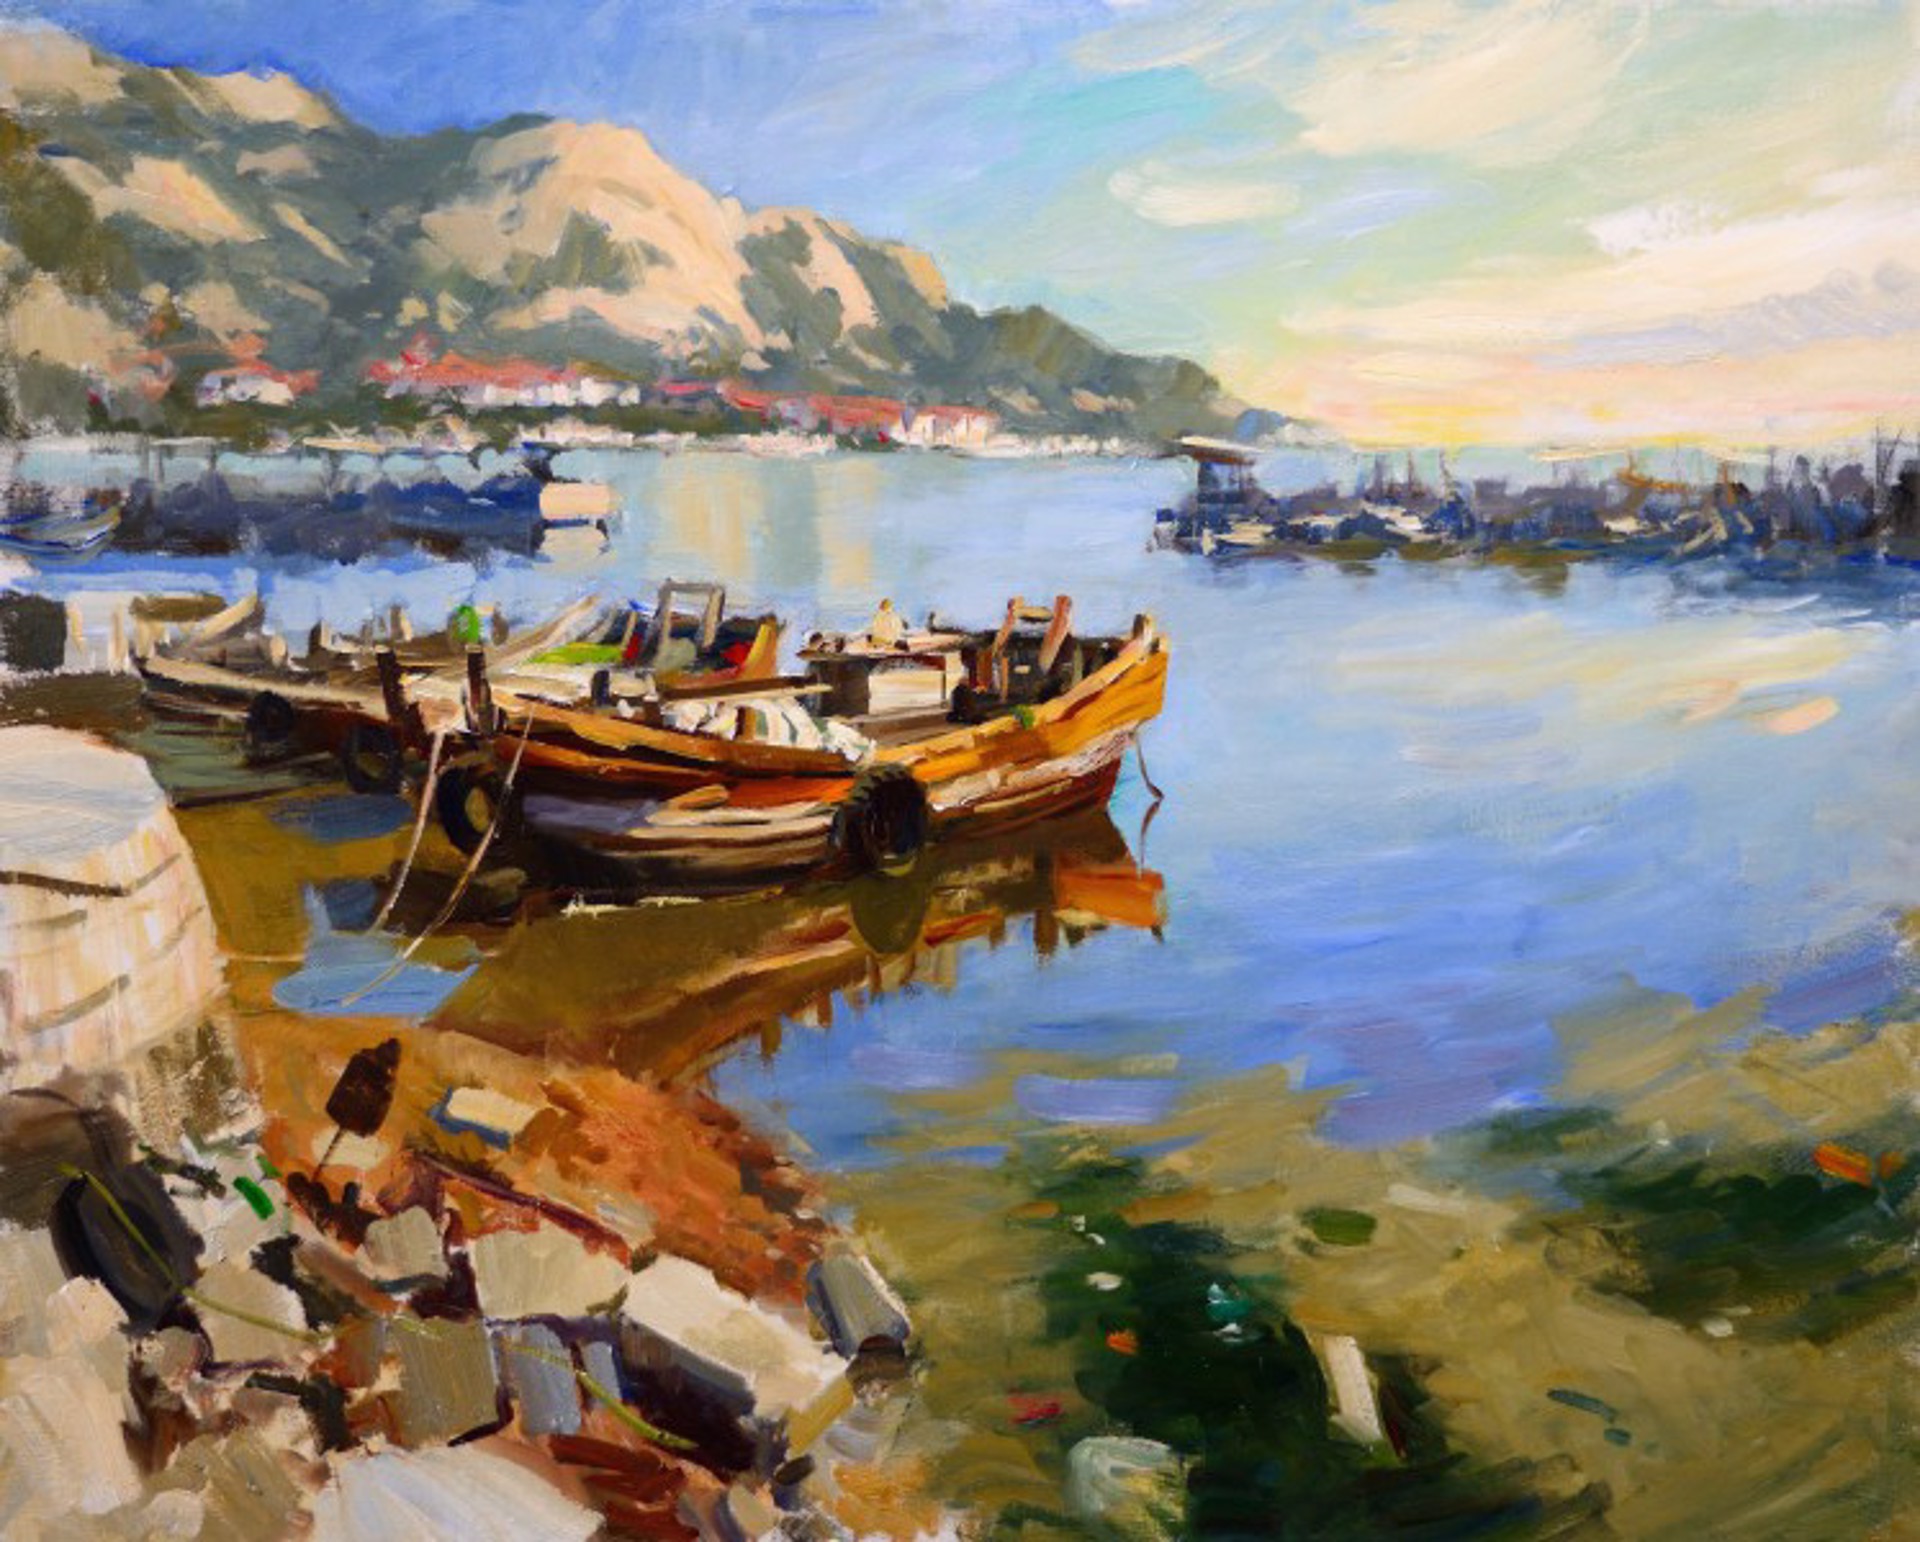 The Harbor at Qing Dao by Ken Cadwallader